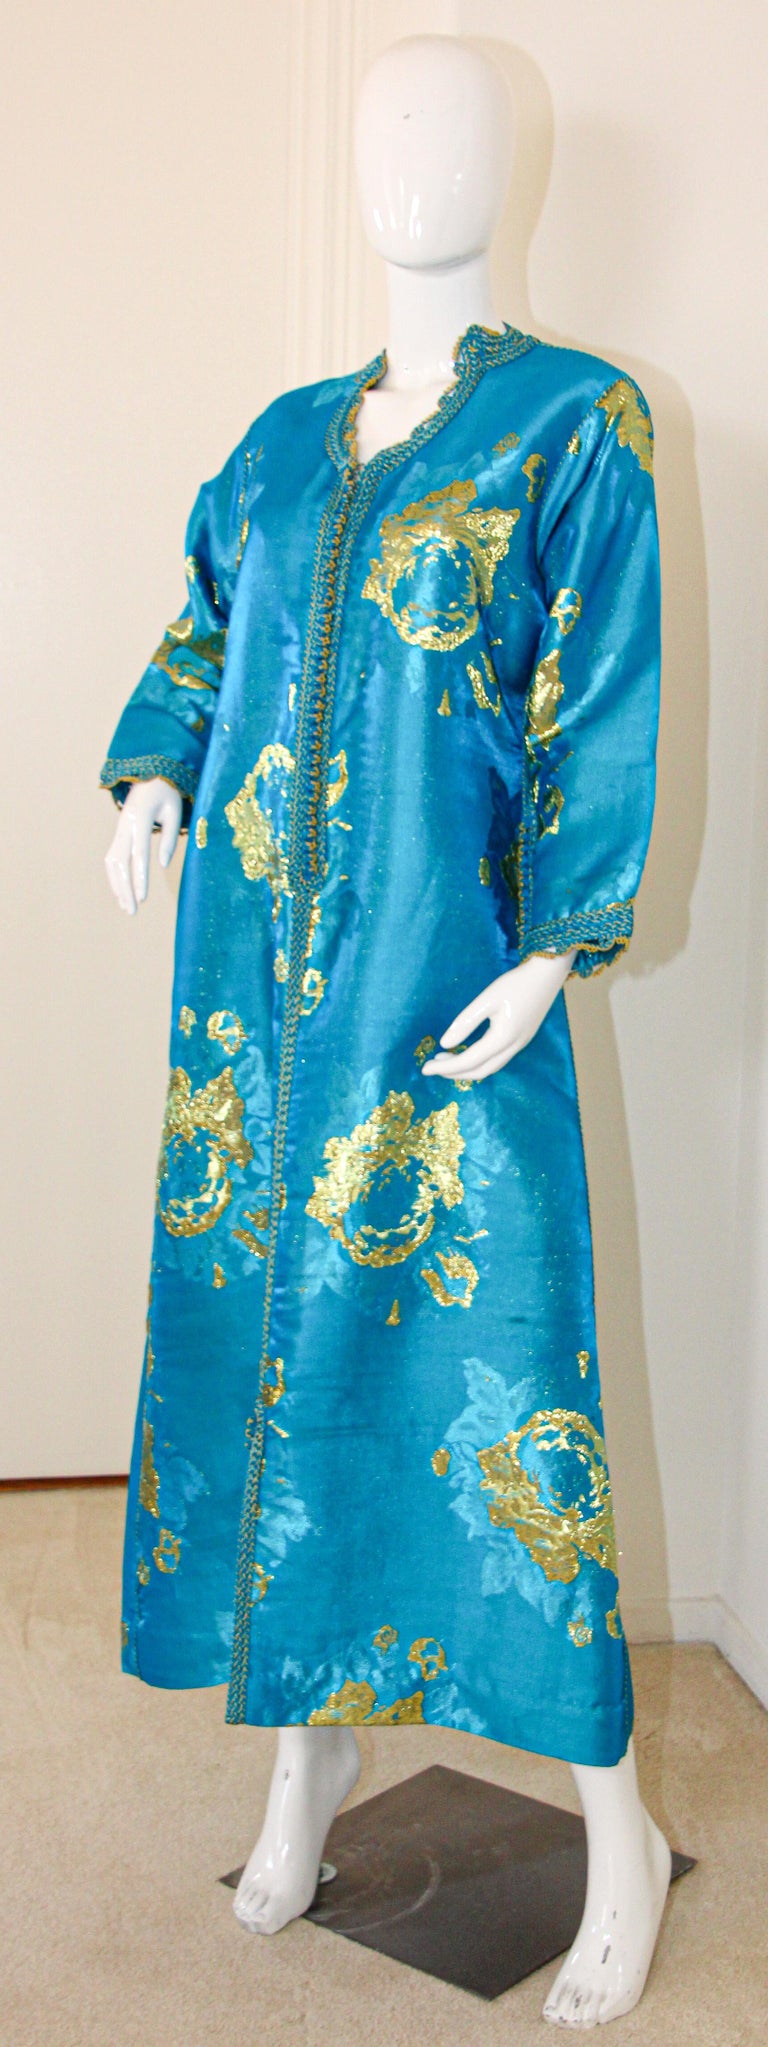 Elegant Moroccan caftan in turquoise and gold floral lame metallic and embroidered trim,
circa 1970s.
This long maxi dress kaftan is embroidered and embellished entirely by hand detailing around neckline, shoulders and cuffs.
It’s crafted in Morocco